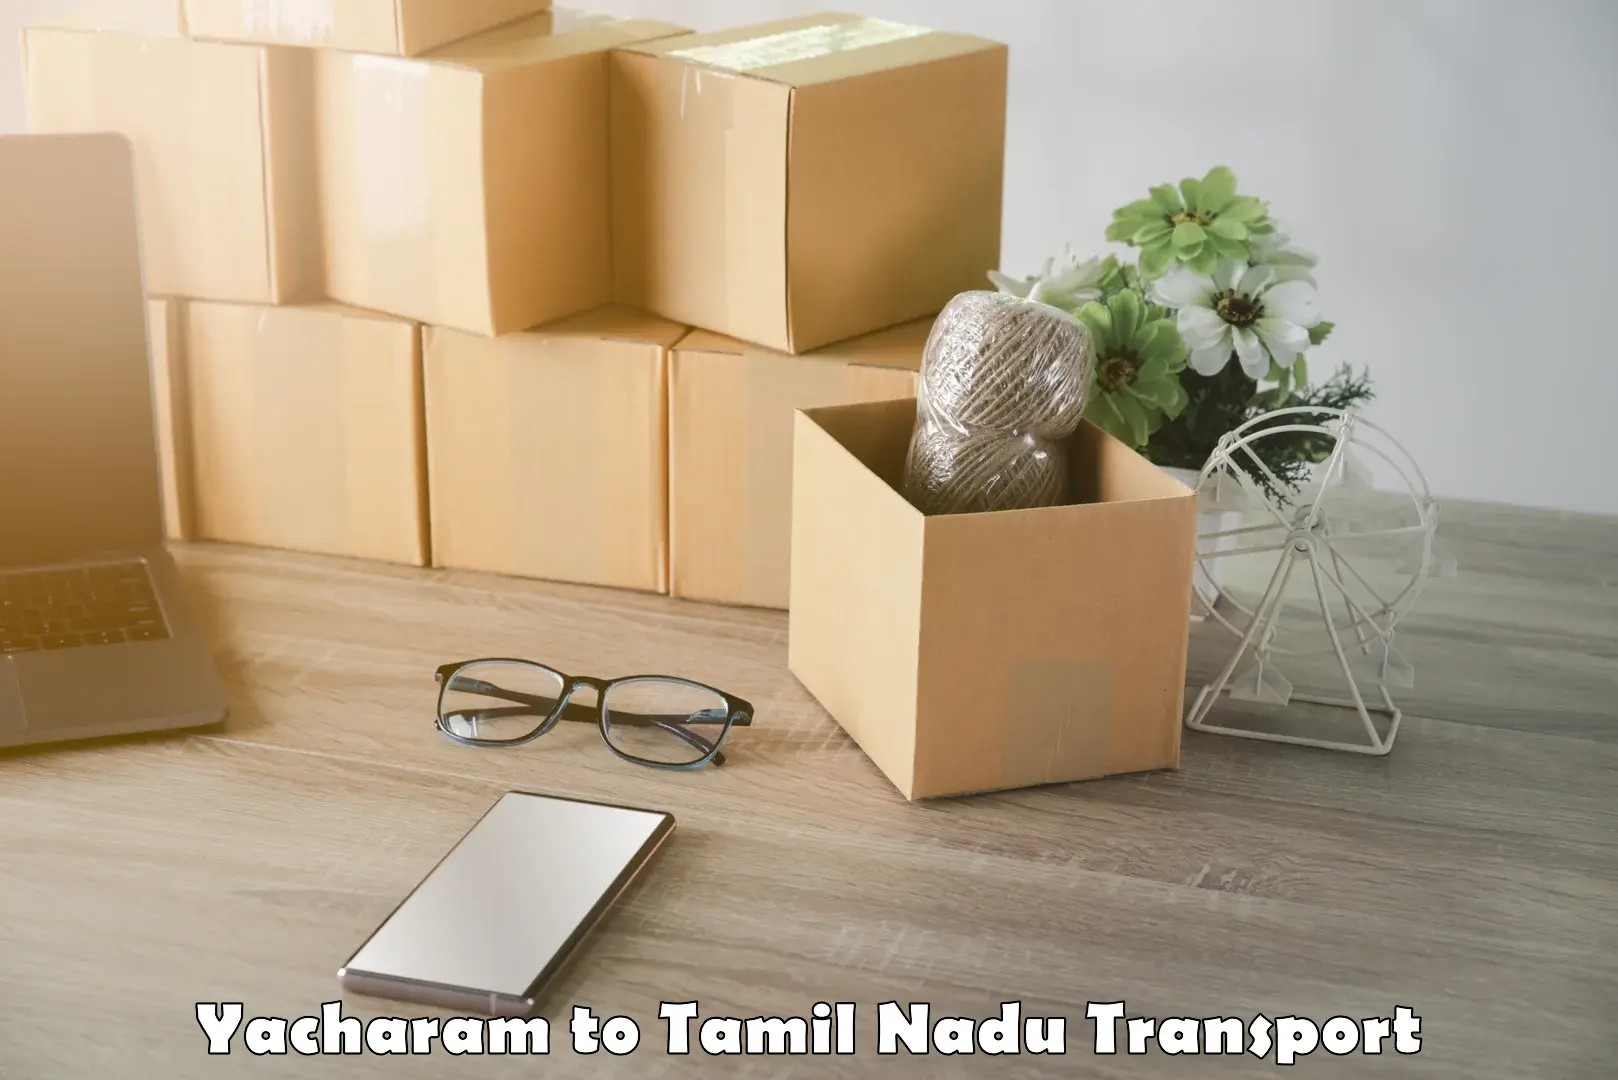 Delivery service Yacharam to Coimbatore